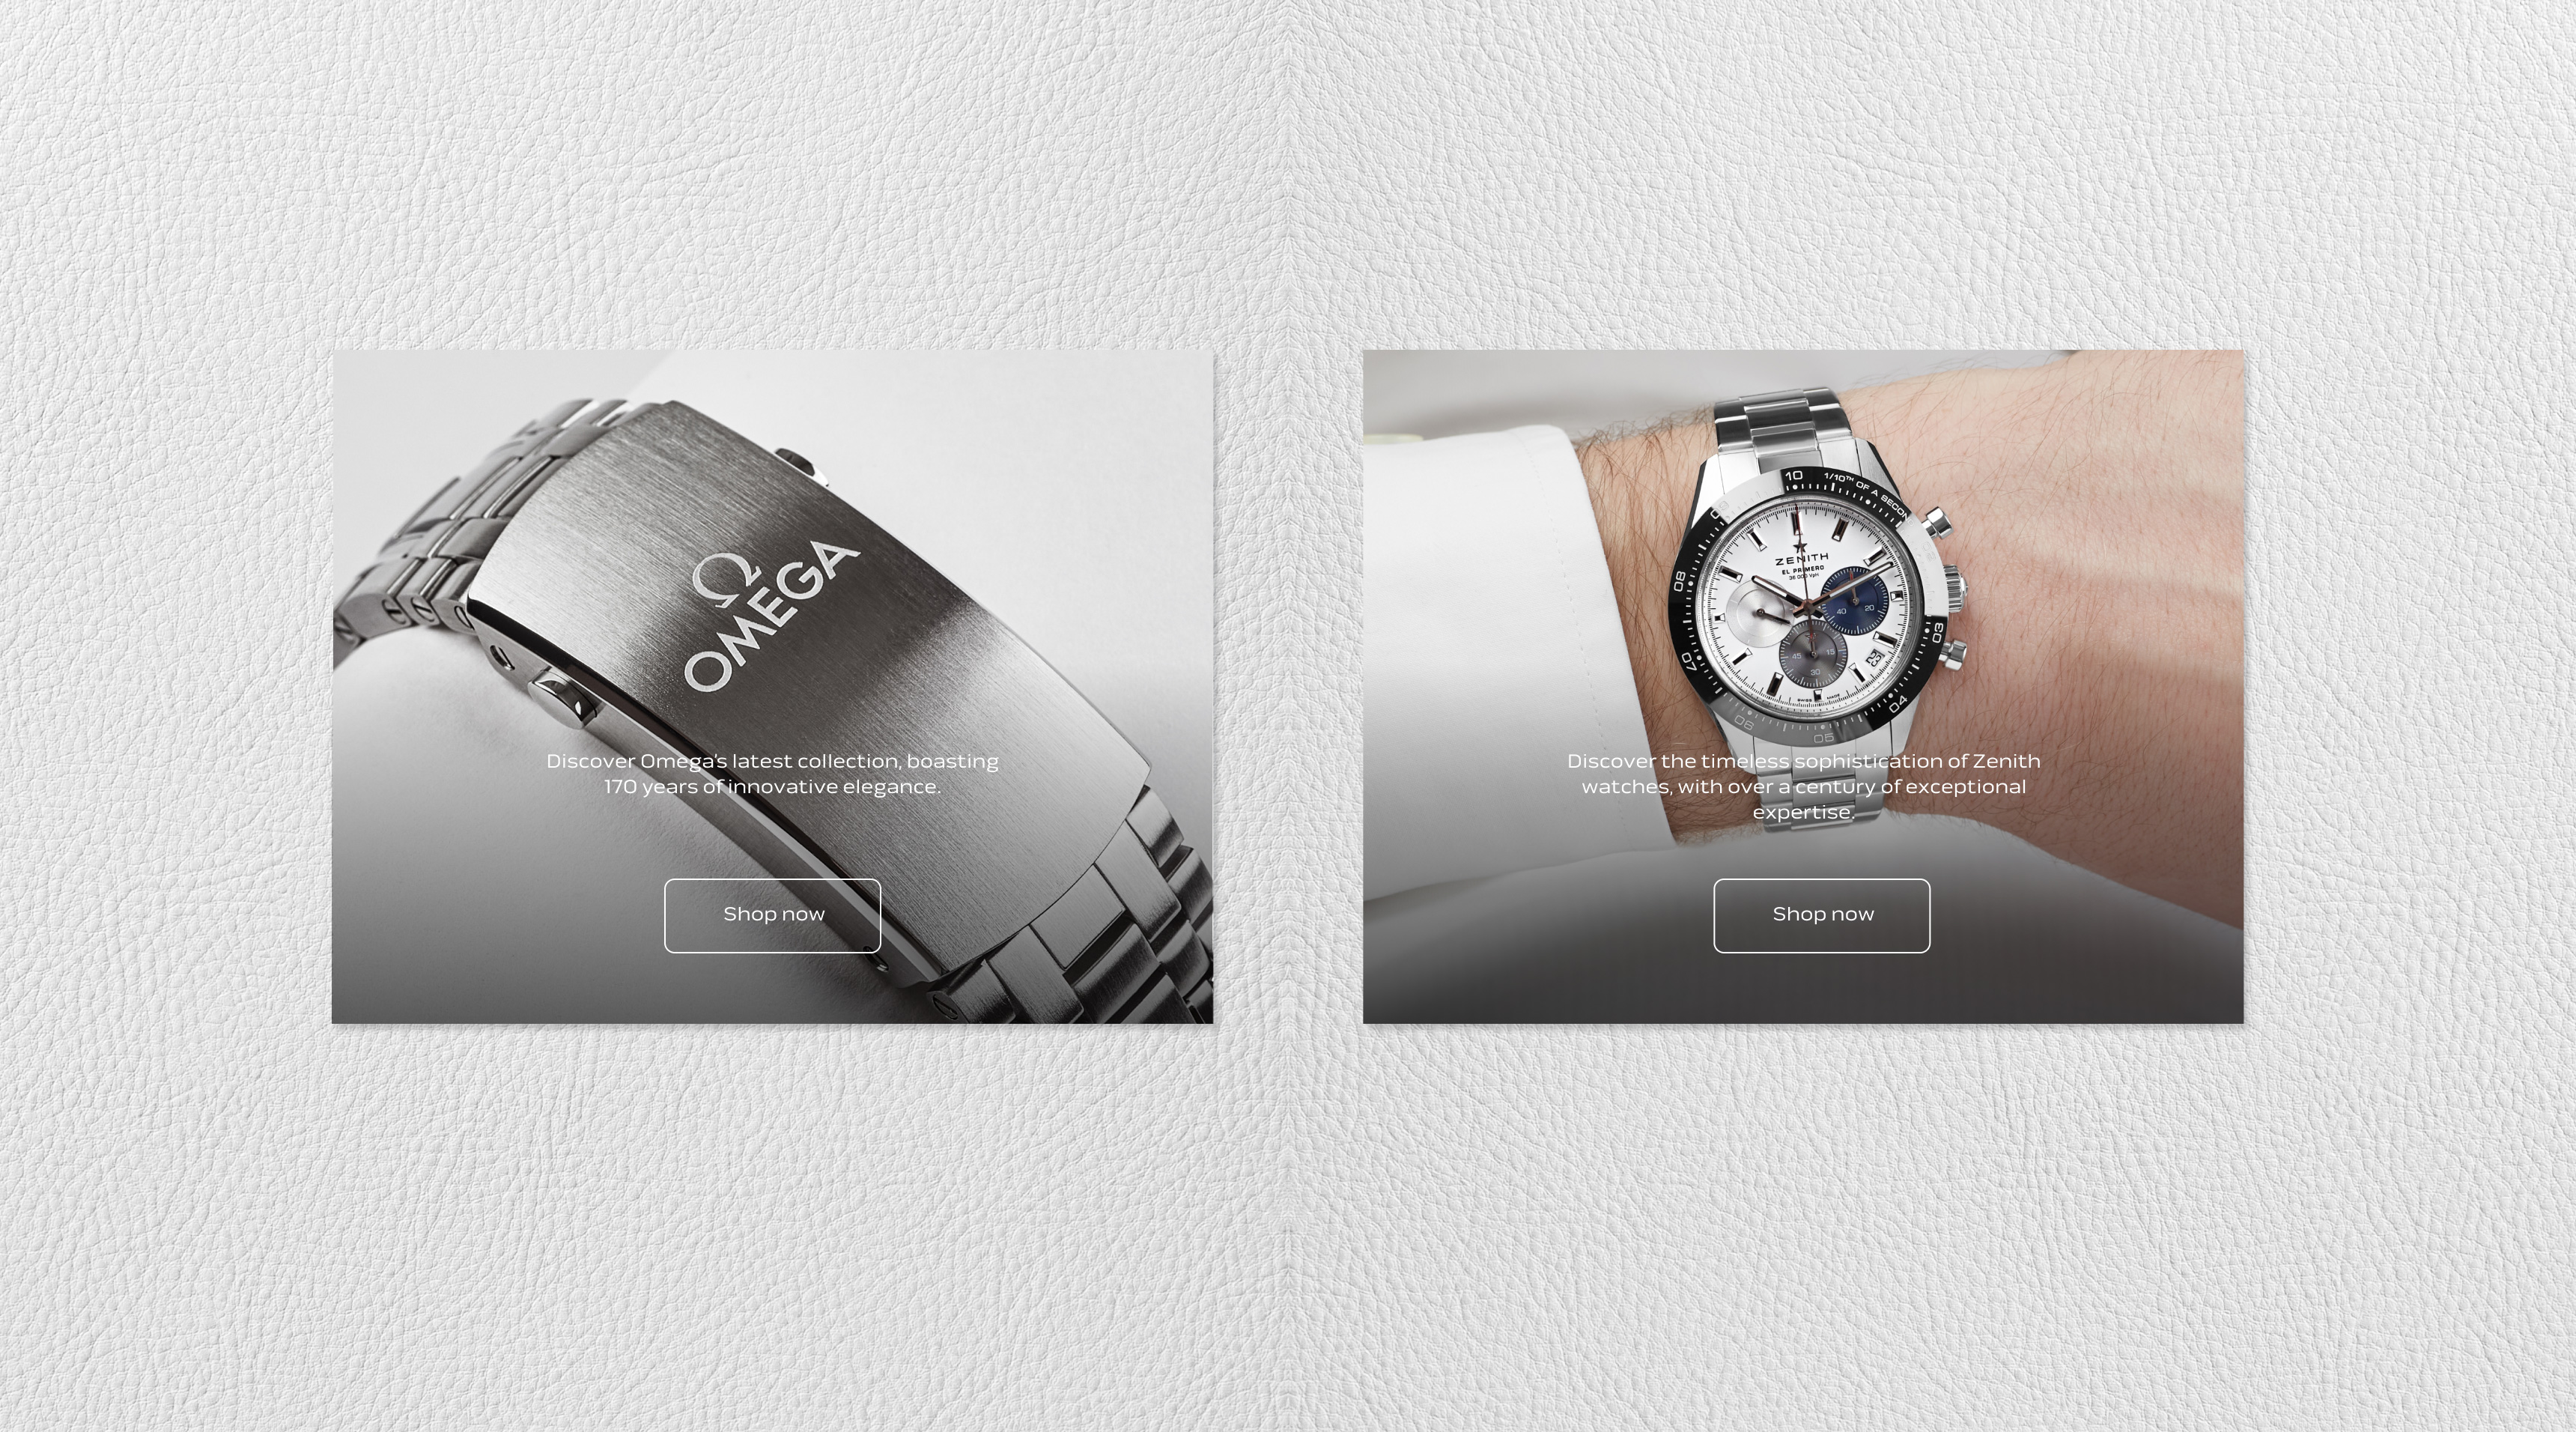 Two images of watch sales banner ad designs.